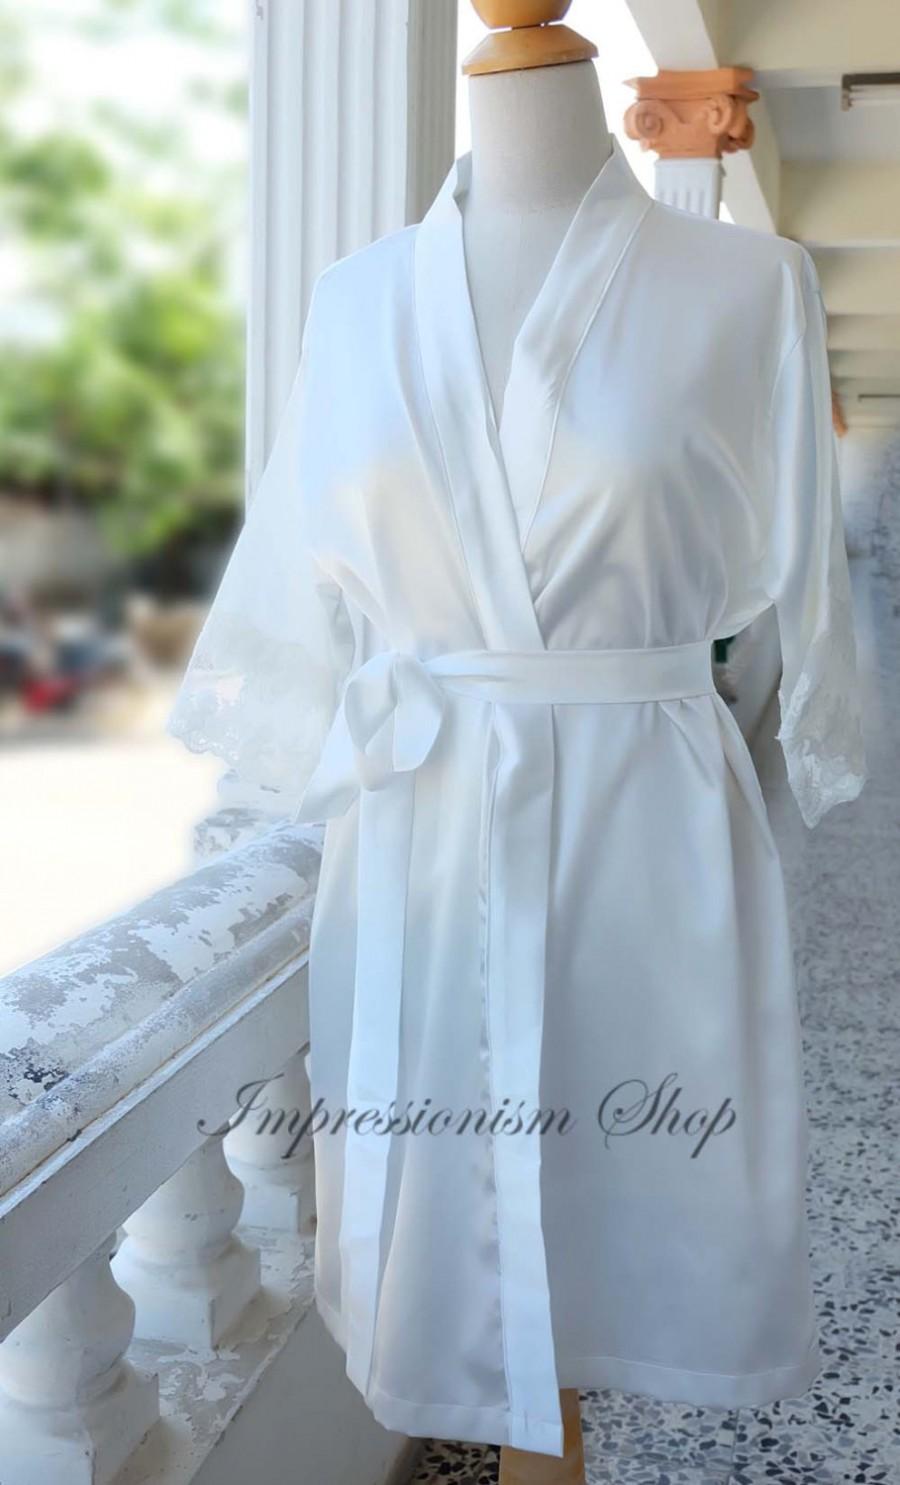 Свадьба - White Ivory Satin Lace Robe for Bride, Lingerie, Getting Ready, Bridal Gift, Bachelorette party Gift, Honeymoon, Lace Kimono, Wedding Gift